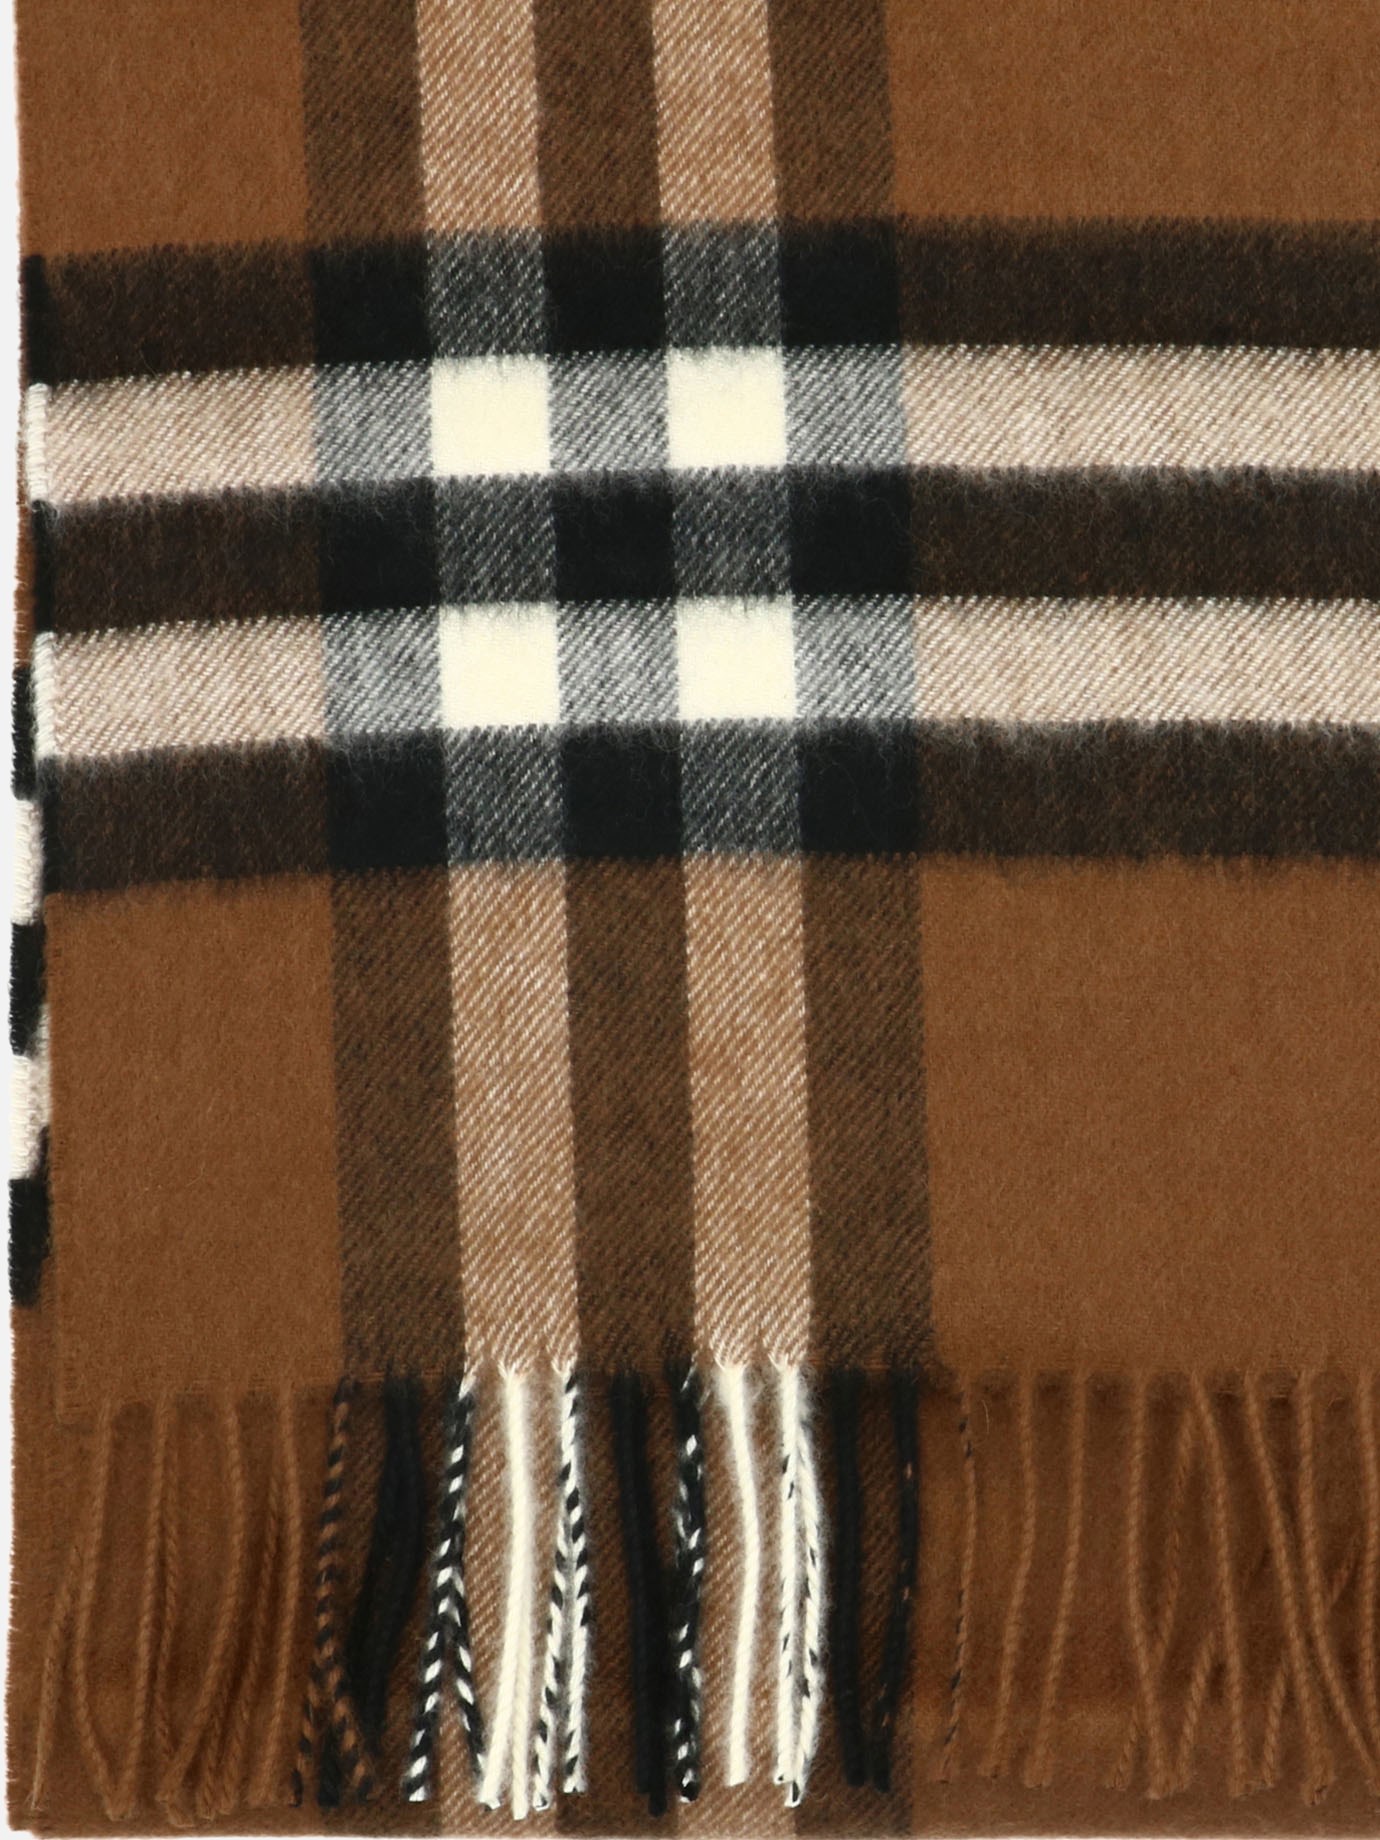  Giant Check  scarf by Burberry